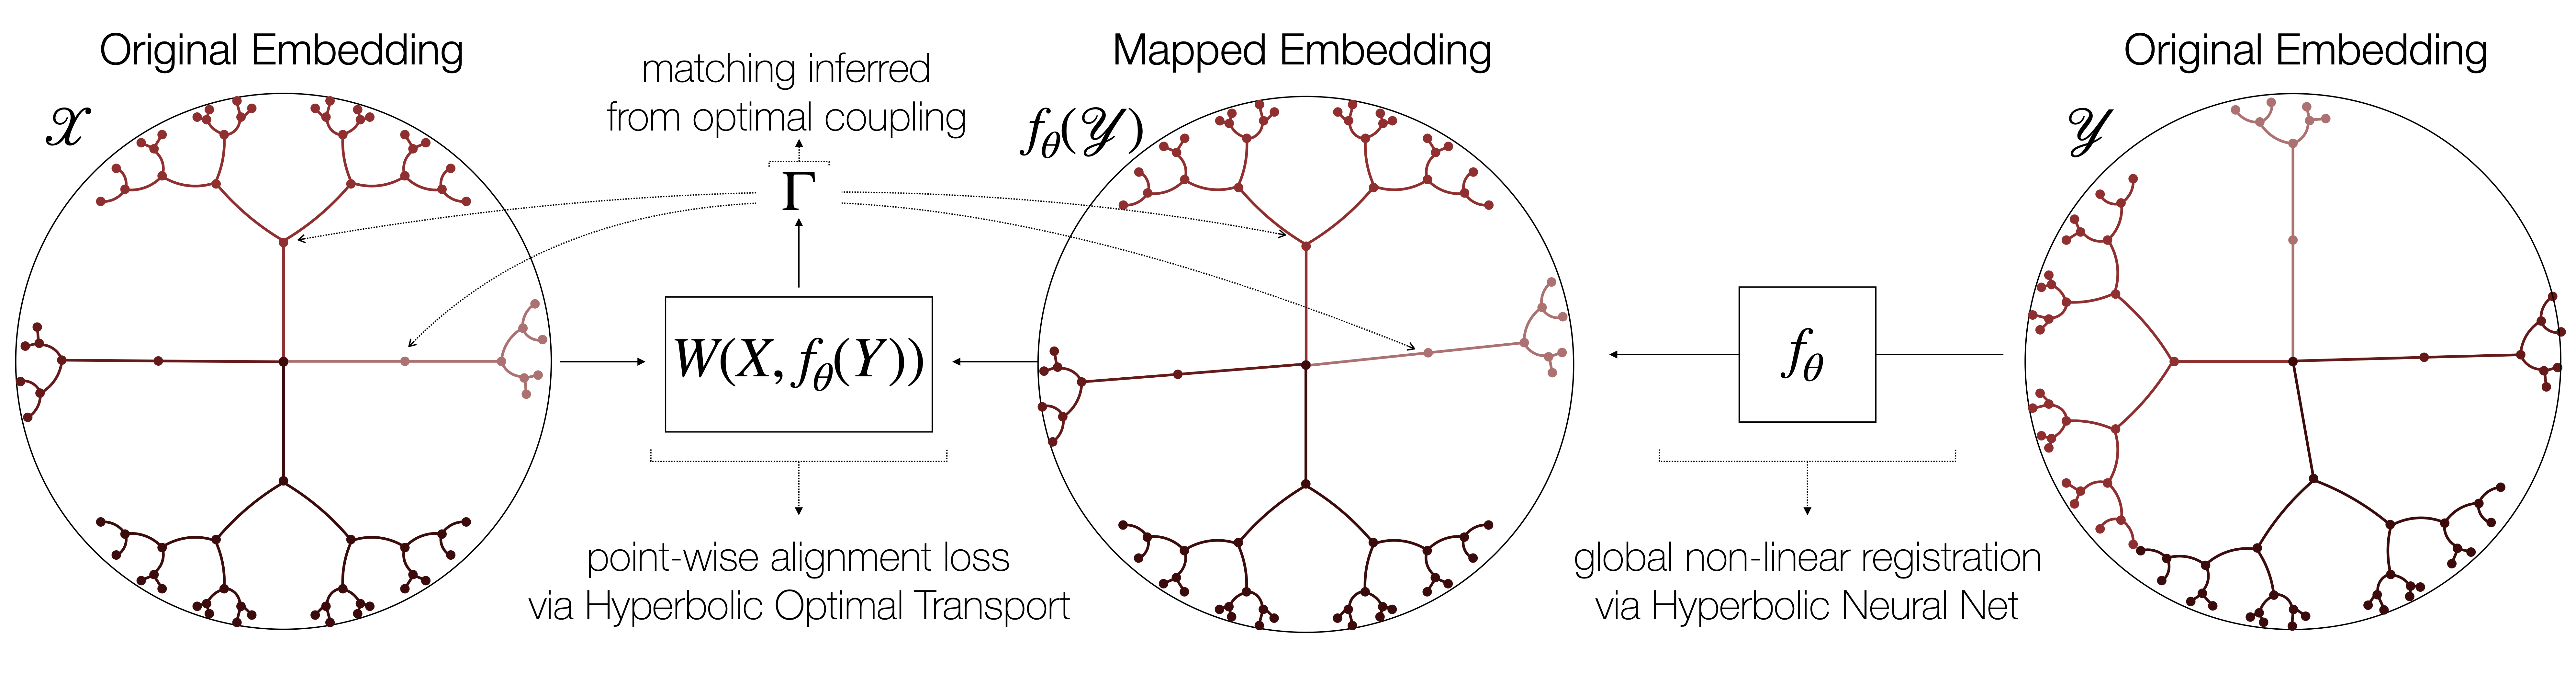 Schematic representation of the proposed approach. A deep network globally
registers the two hyperbolic embedding spaces (X and Y) by correcting for non-linear
branch permutations, so that source and mapped target points can be aligned using
a hyperbolic variant of Wasserstein distance. Training is done end-to-end in a fully
unsupervised way – no prior known correspondences between the hierarchies are assumed.